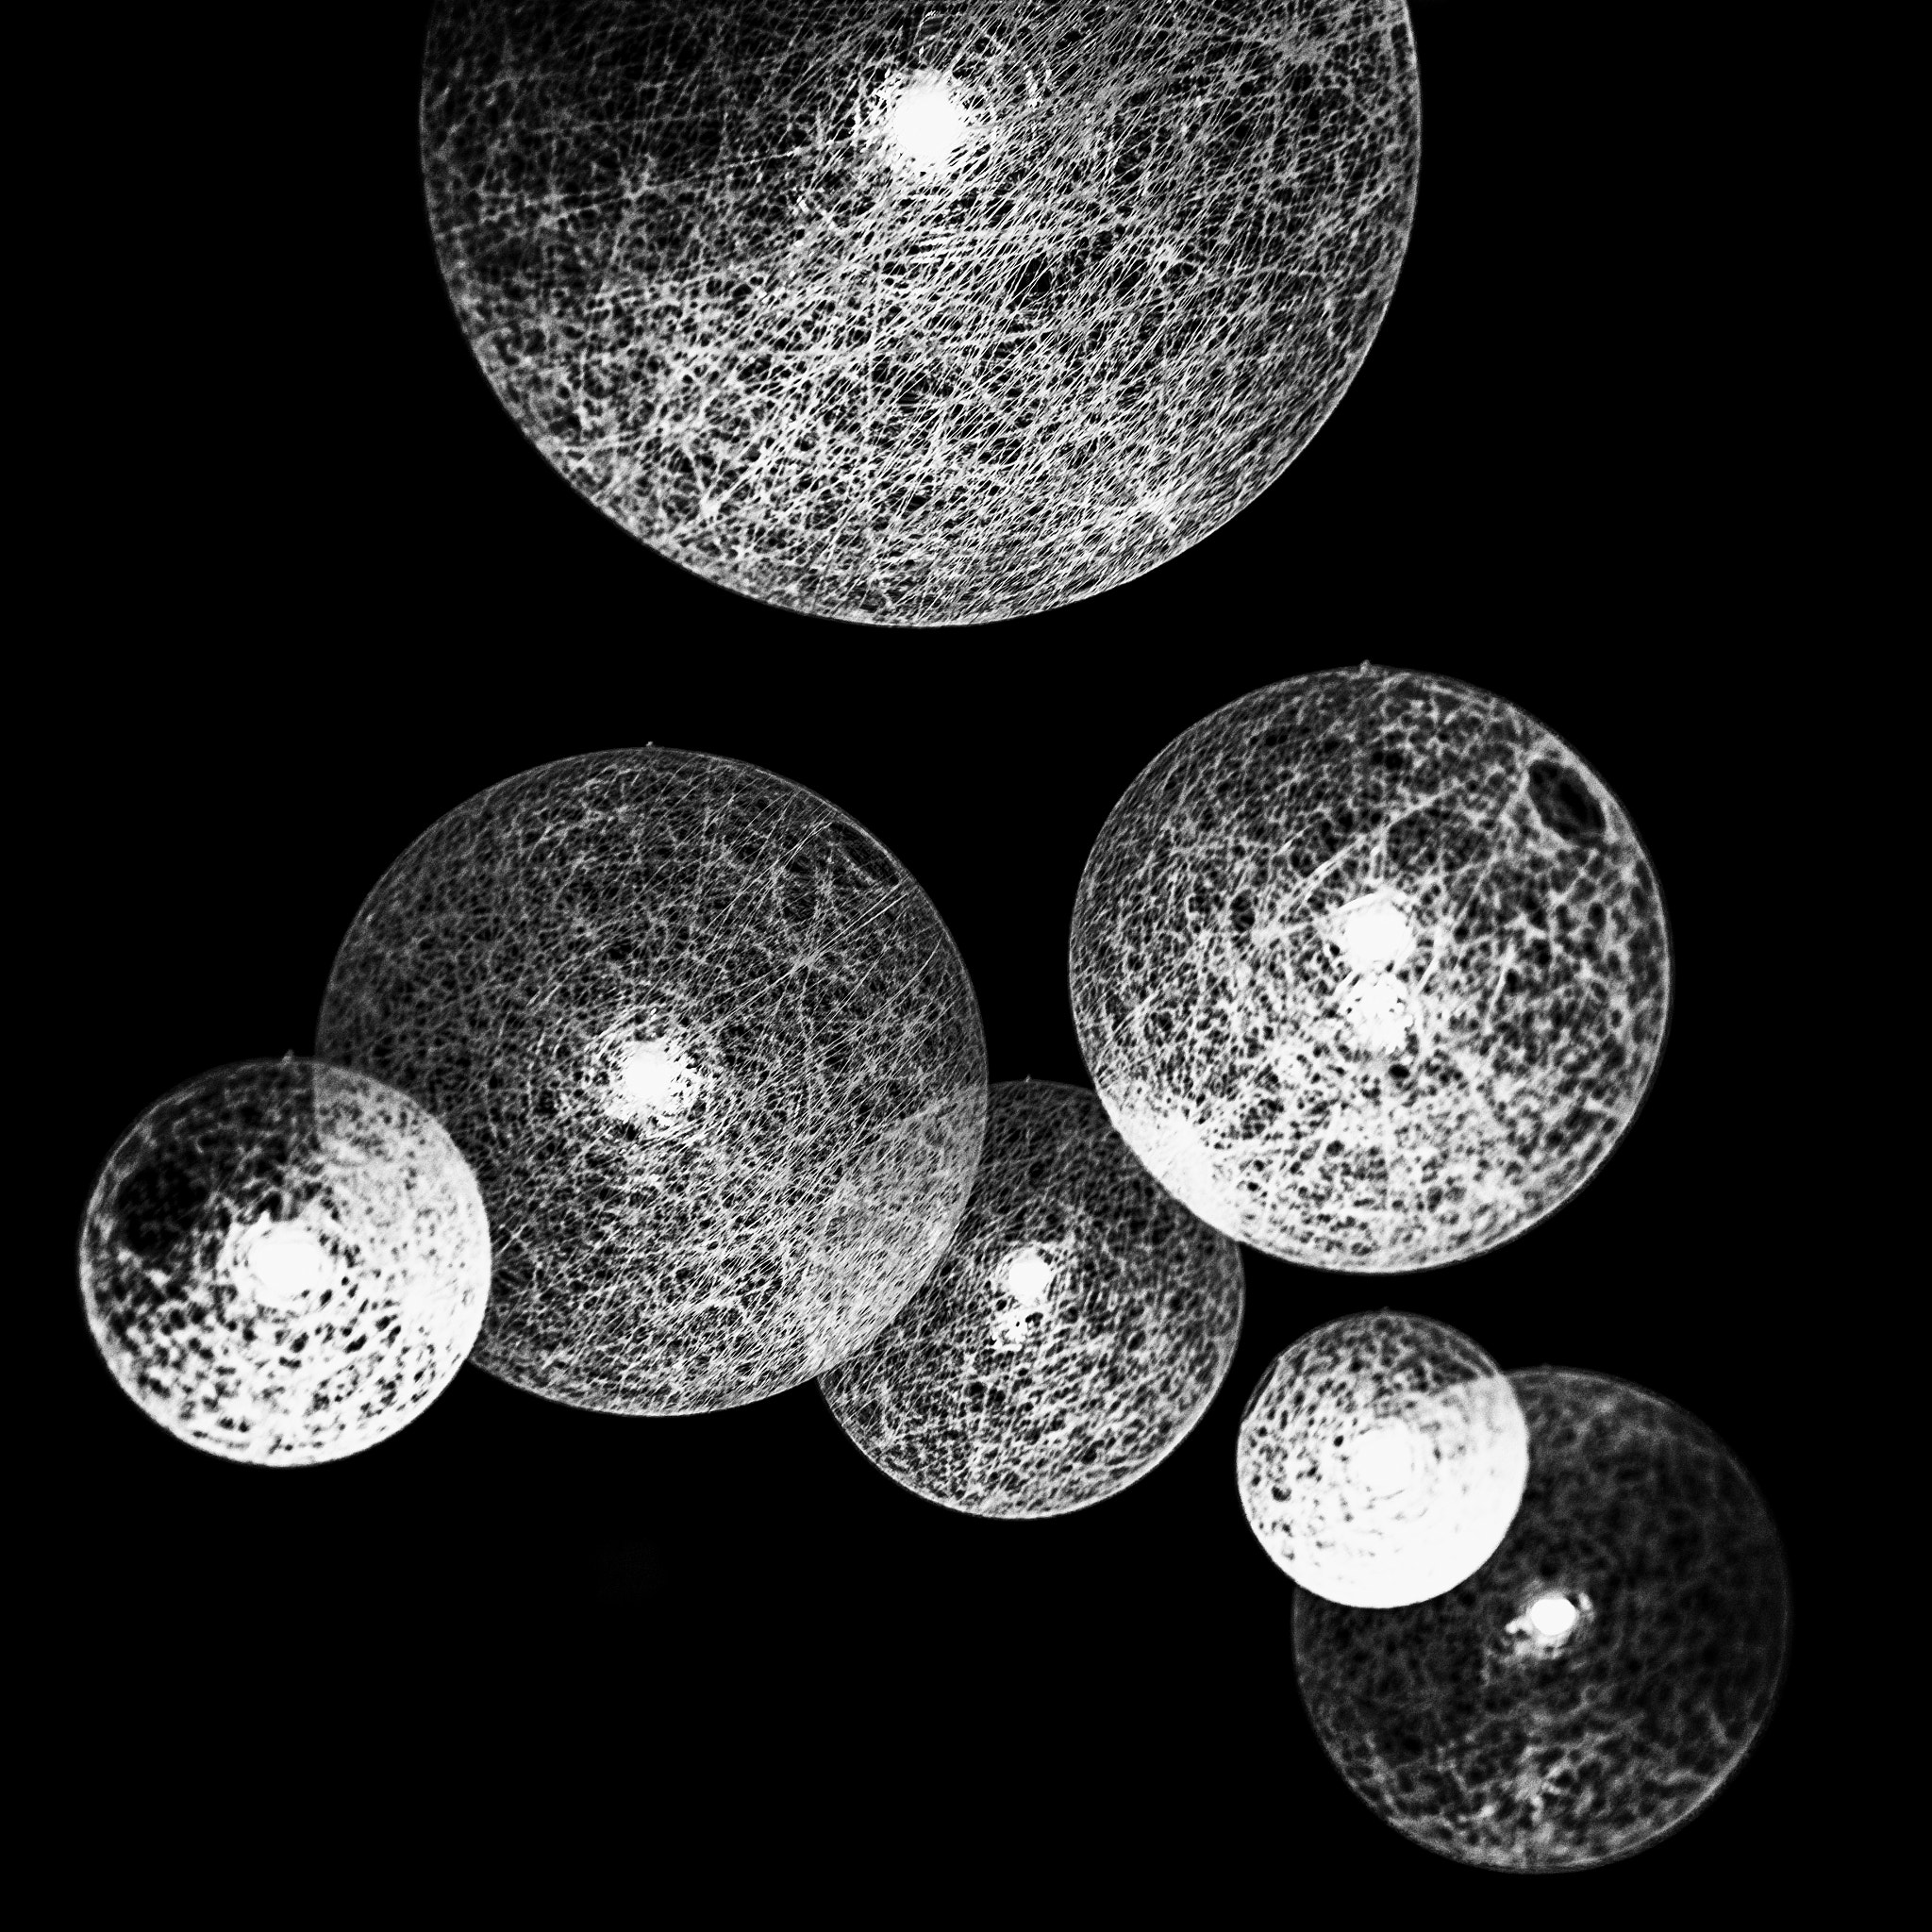 Nikon D800 sample photo. Seven spheres in a square ii photography